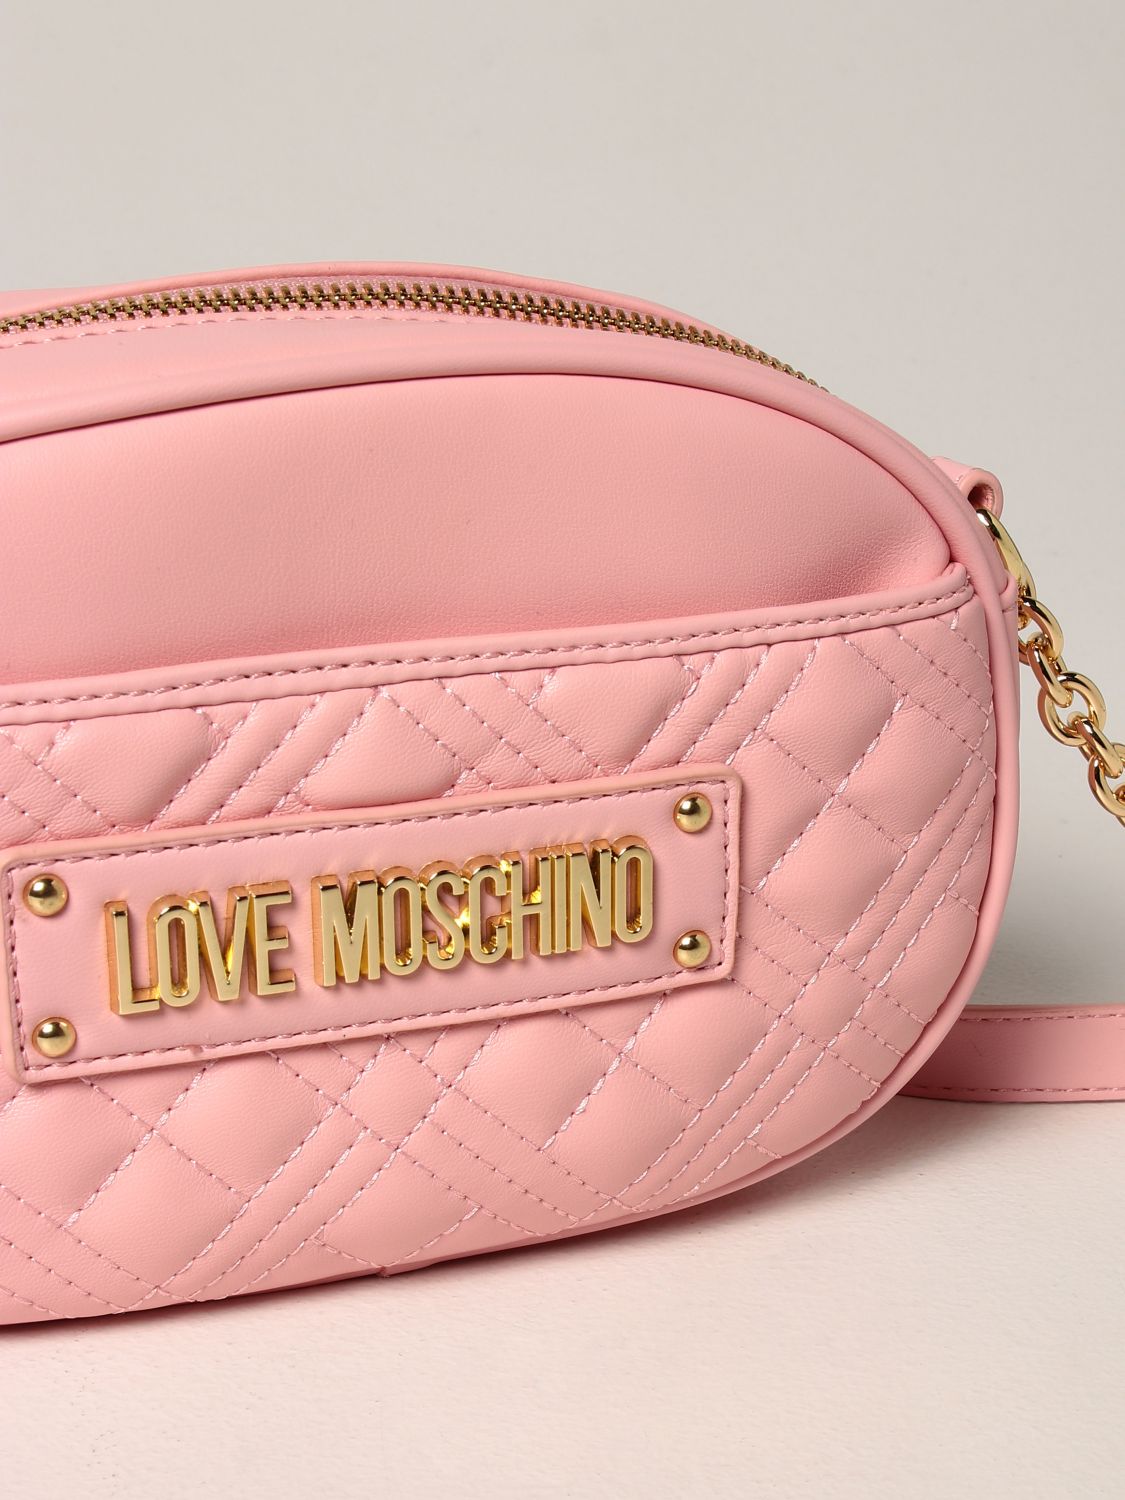 Leather Shoulder Bags Love Moschino Women Women Bags Love Moschino Women Leather Bags Love Moschino Women Leather Shoulder Bags Love Moschino Women Leather Shoulder Bag LOVE MOSCHINO pink 